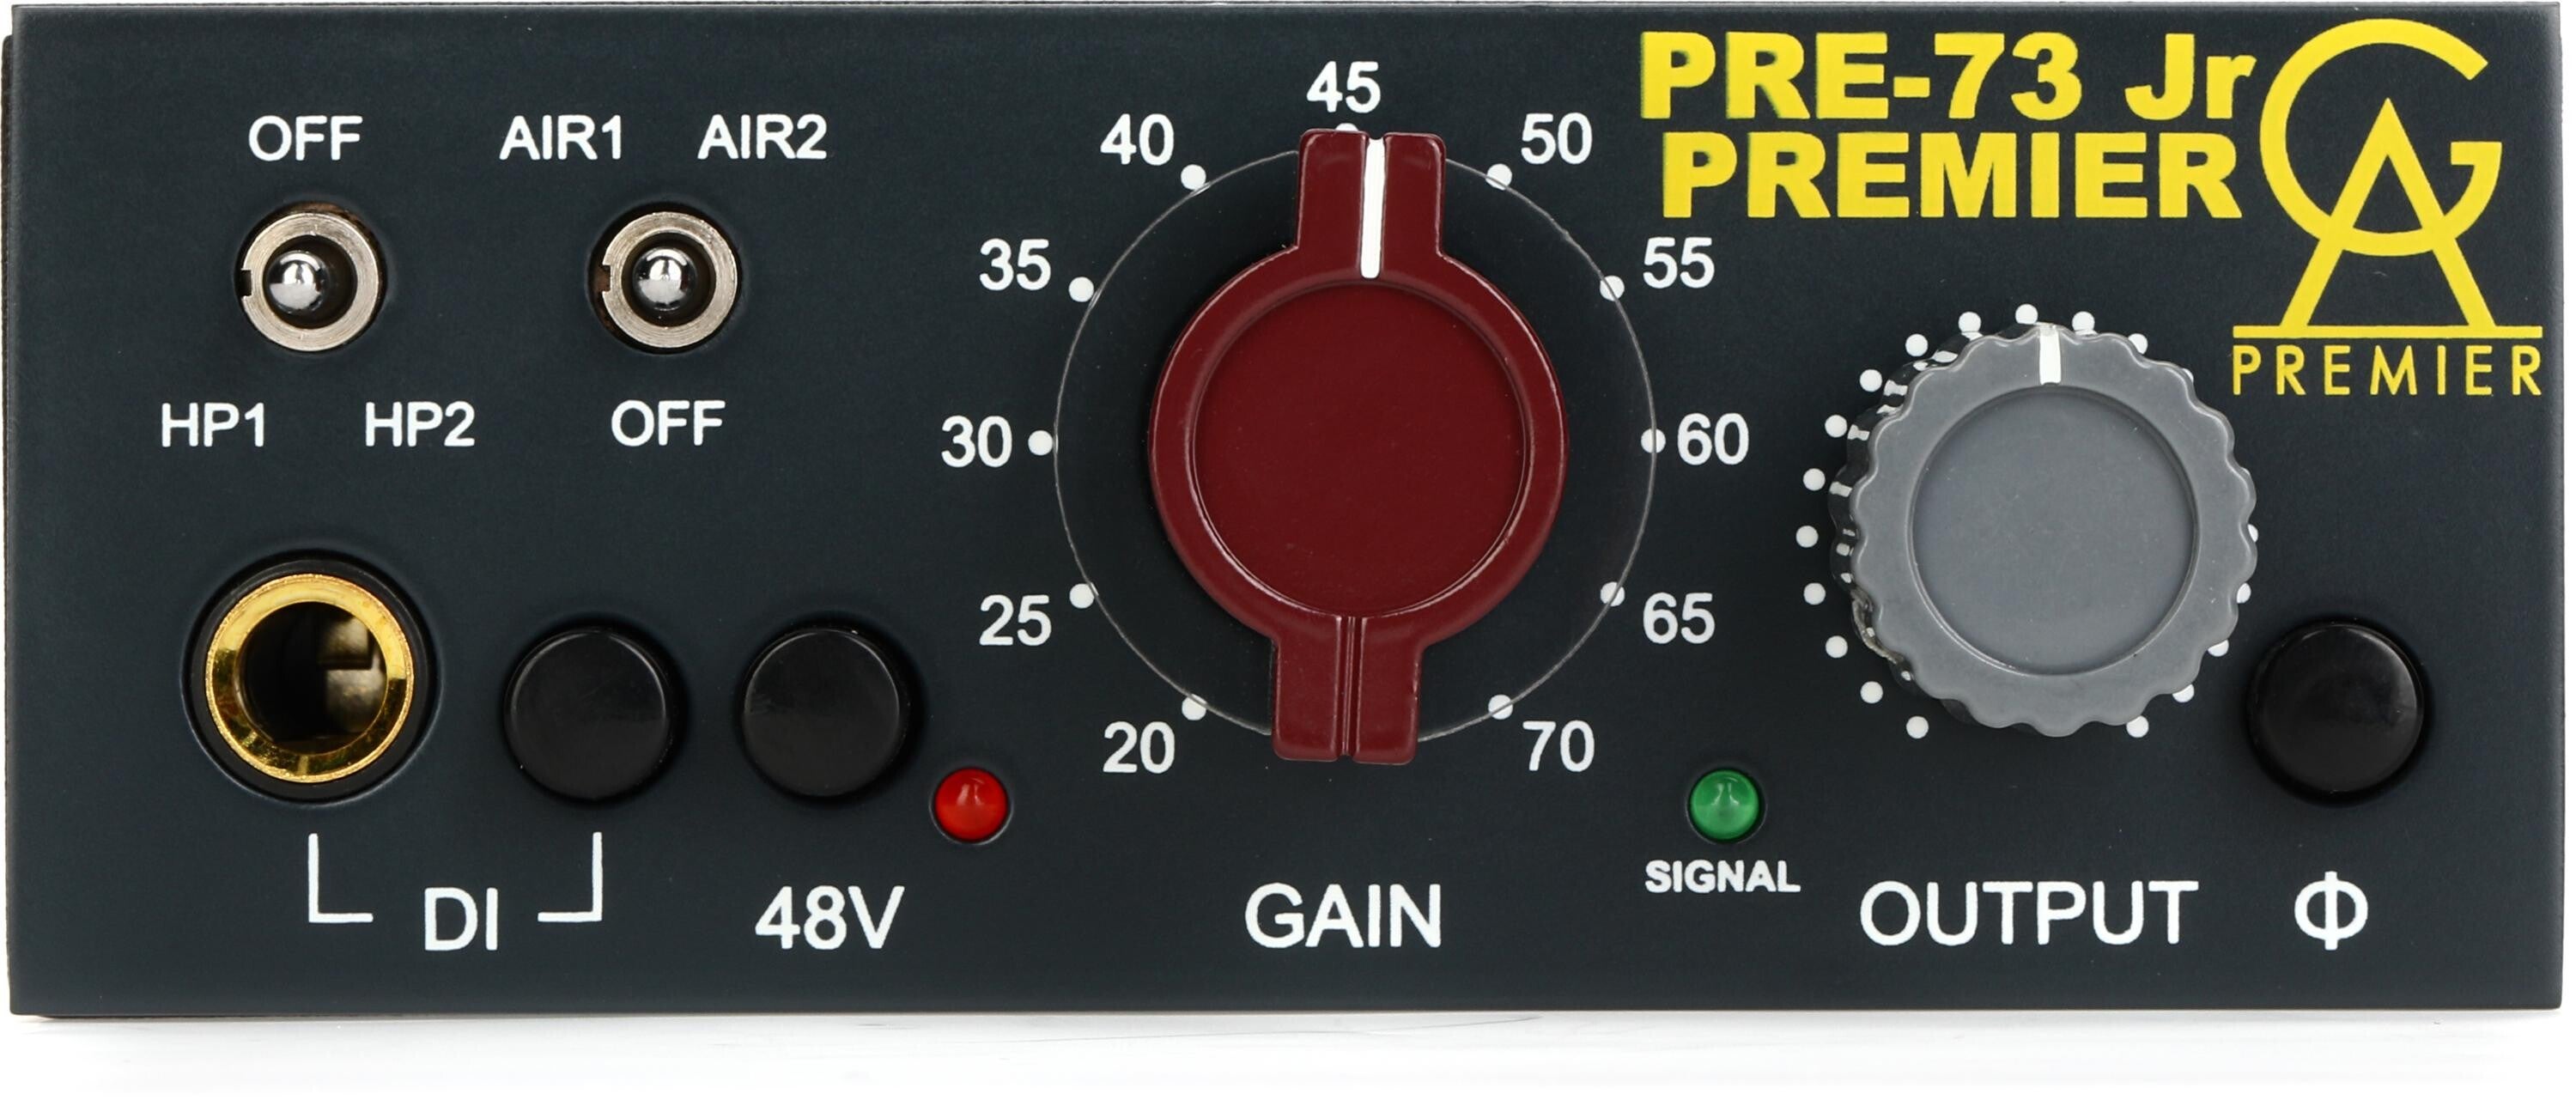 Golden Age Project Pre73 Jr Premier Mic/Instrument Preamp | Sweetwater